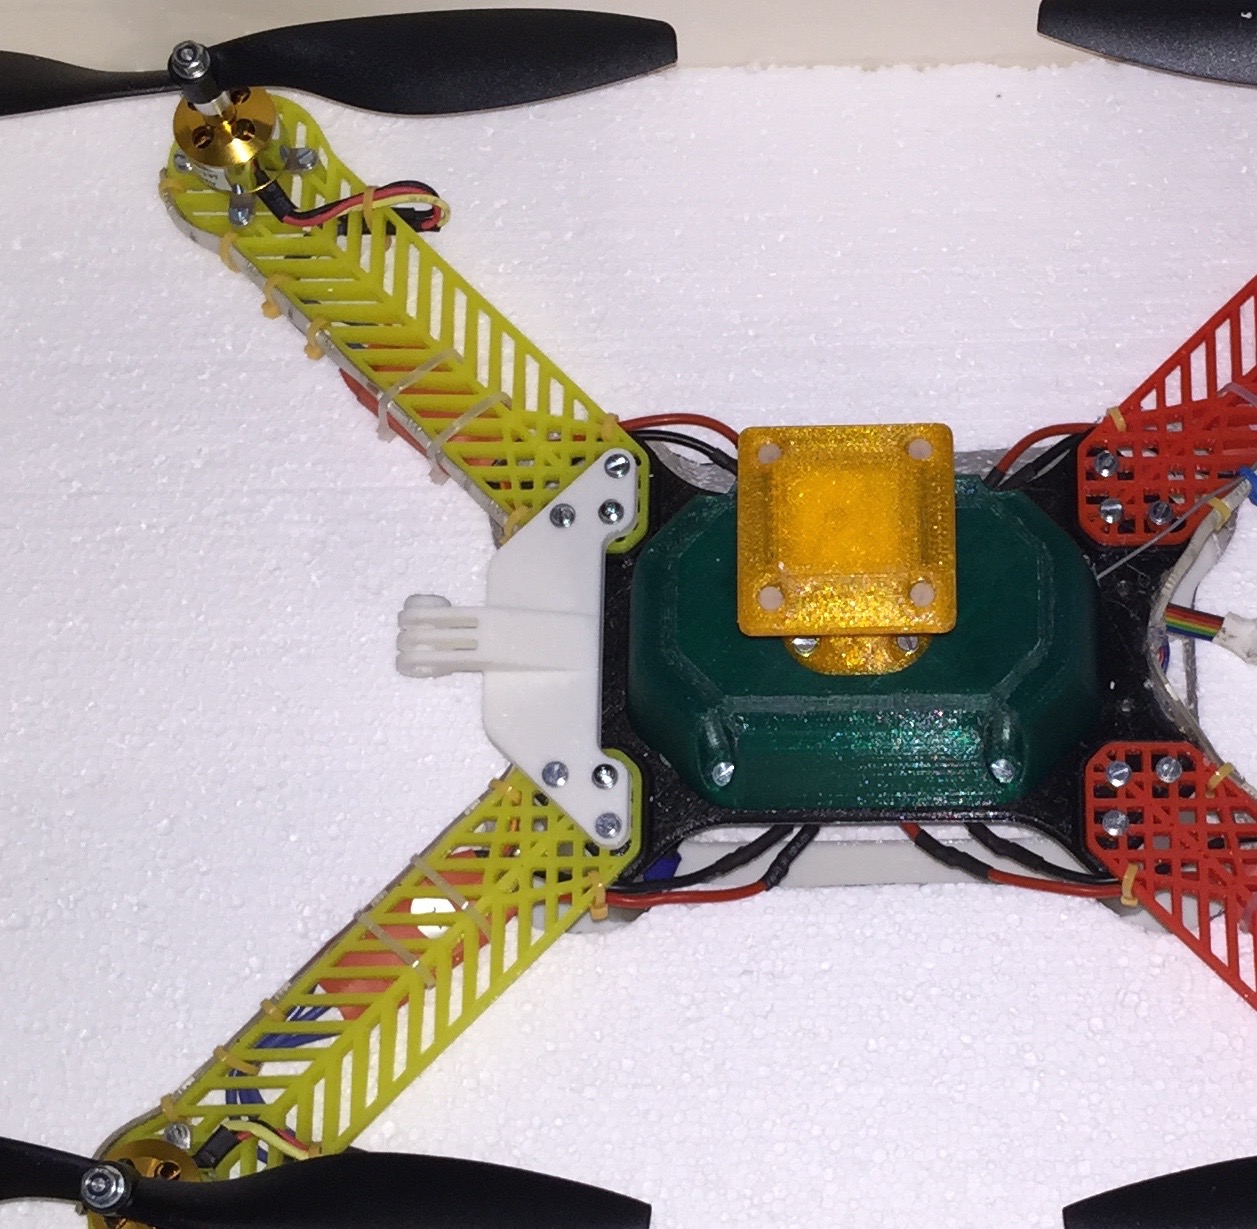 GoPro mount for printable quadcopter